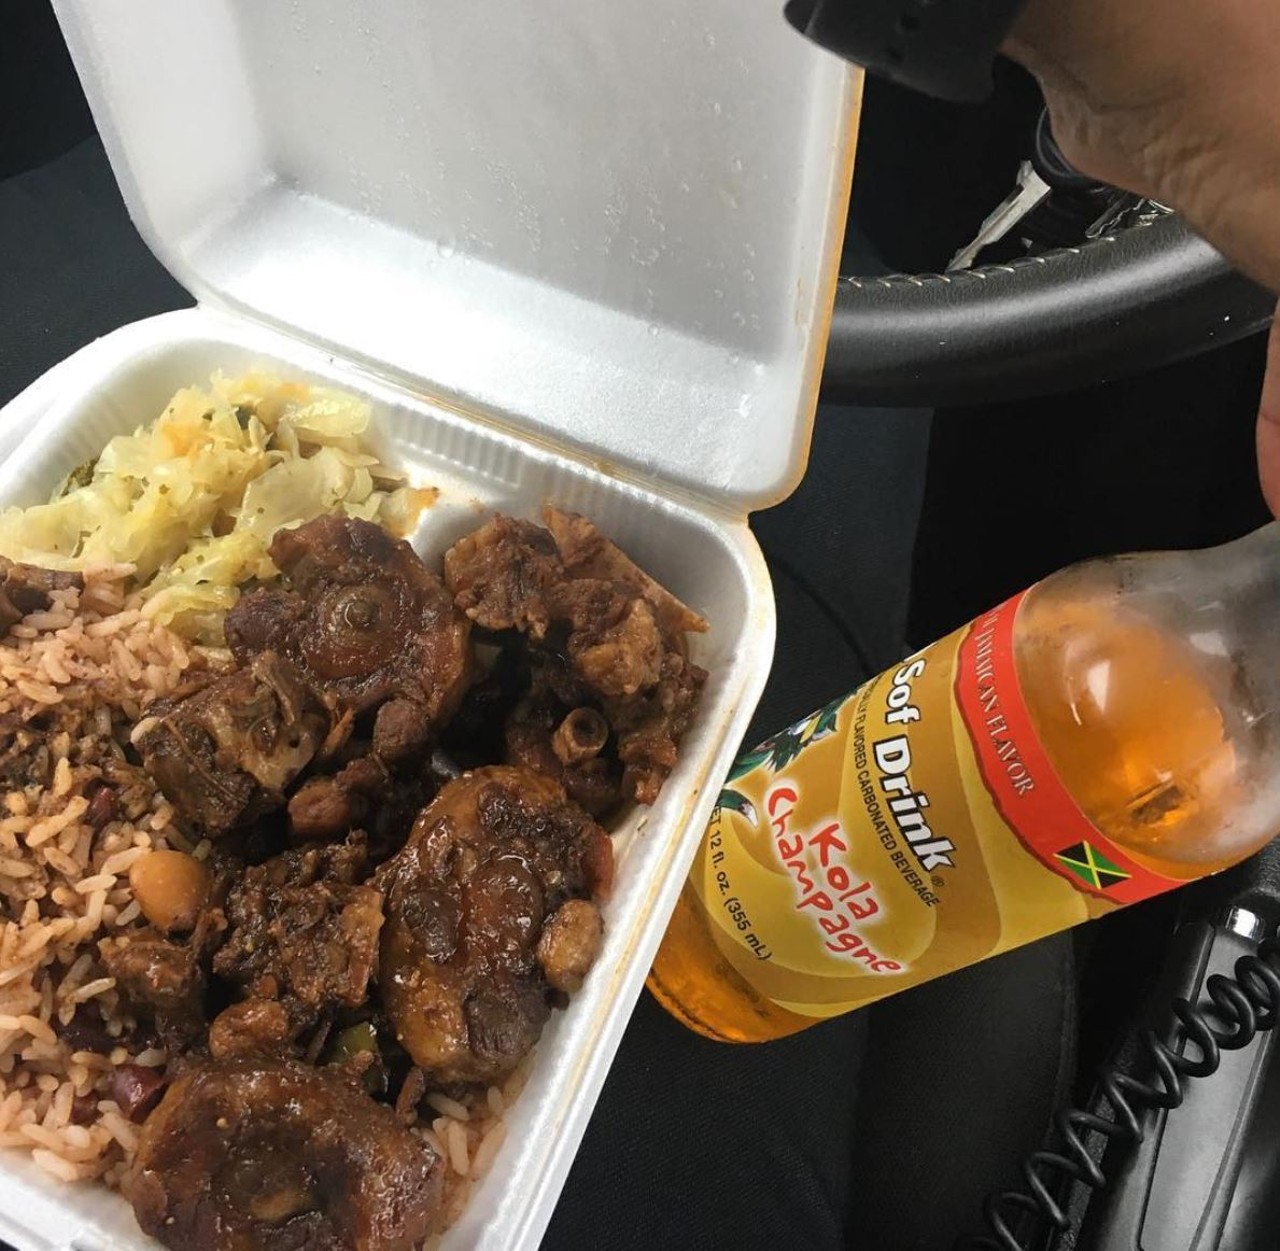 Little Jamaica
5490 Walzem Rd, (210) 637-1293, facebook.com/littlejamaicafoods
San Antonio isn’t well-known for its Jamaican food, but Little Jamaica is well-known for being authentic.
Photo via Instagram / eeshabella25